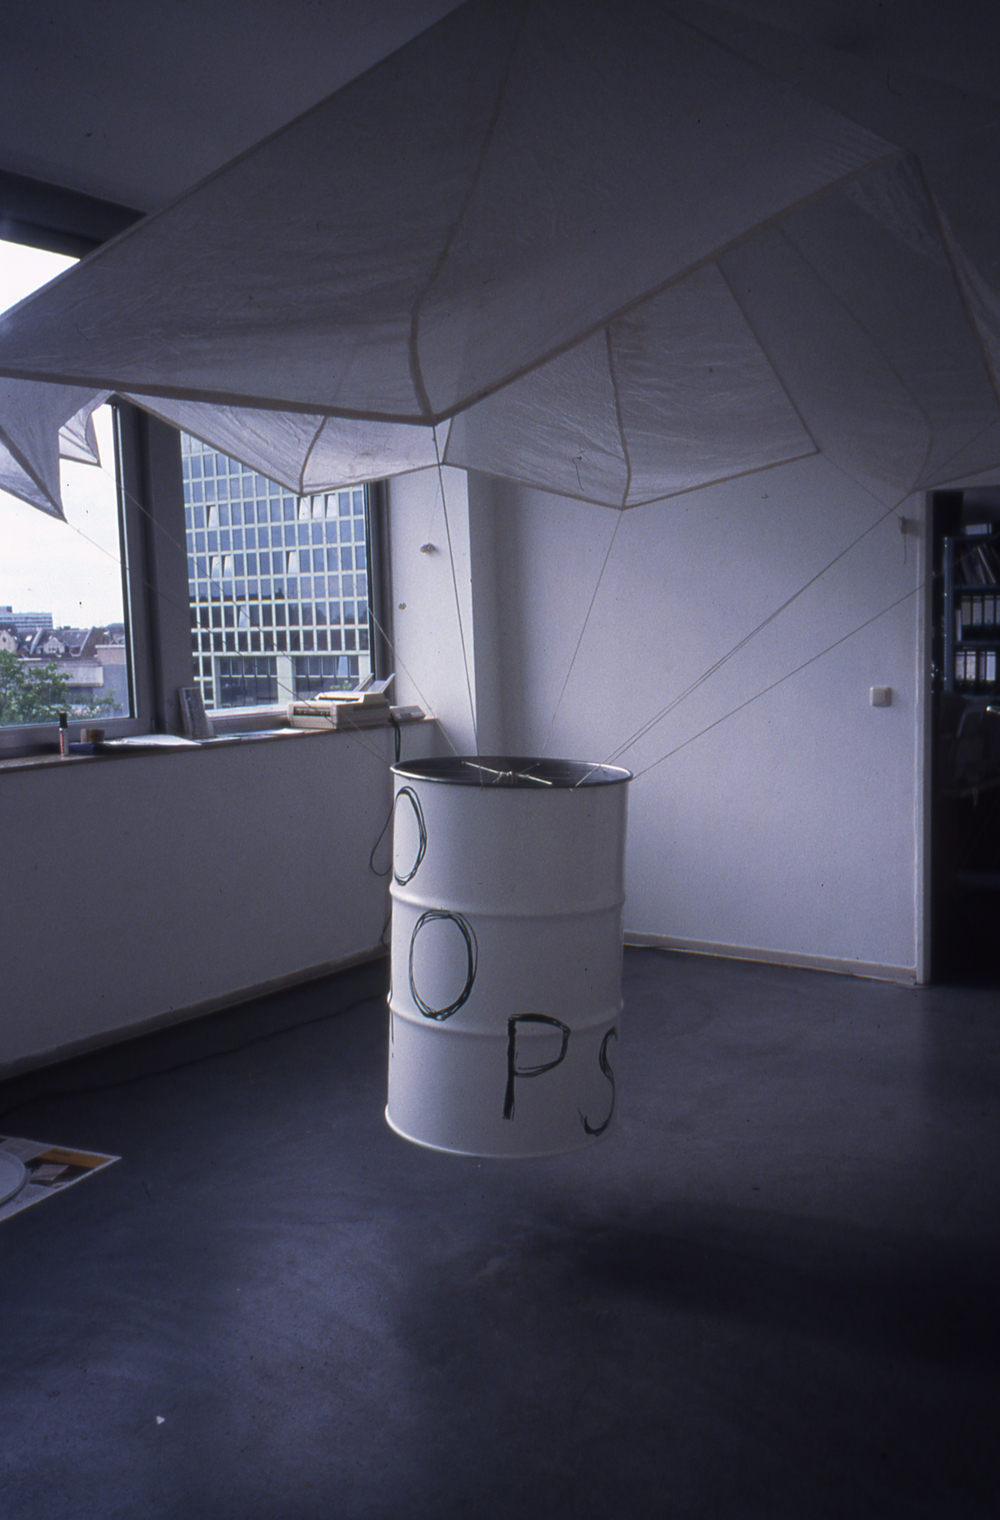  Installation view of  OOPS! (Nobody loves a hegemon)  (1999) in “OOPS! OOPS! Or Nobody Loves a Hegemon” at Galerie Christian Nagel, Cologne, 1999. 